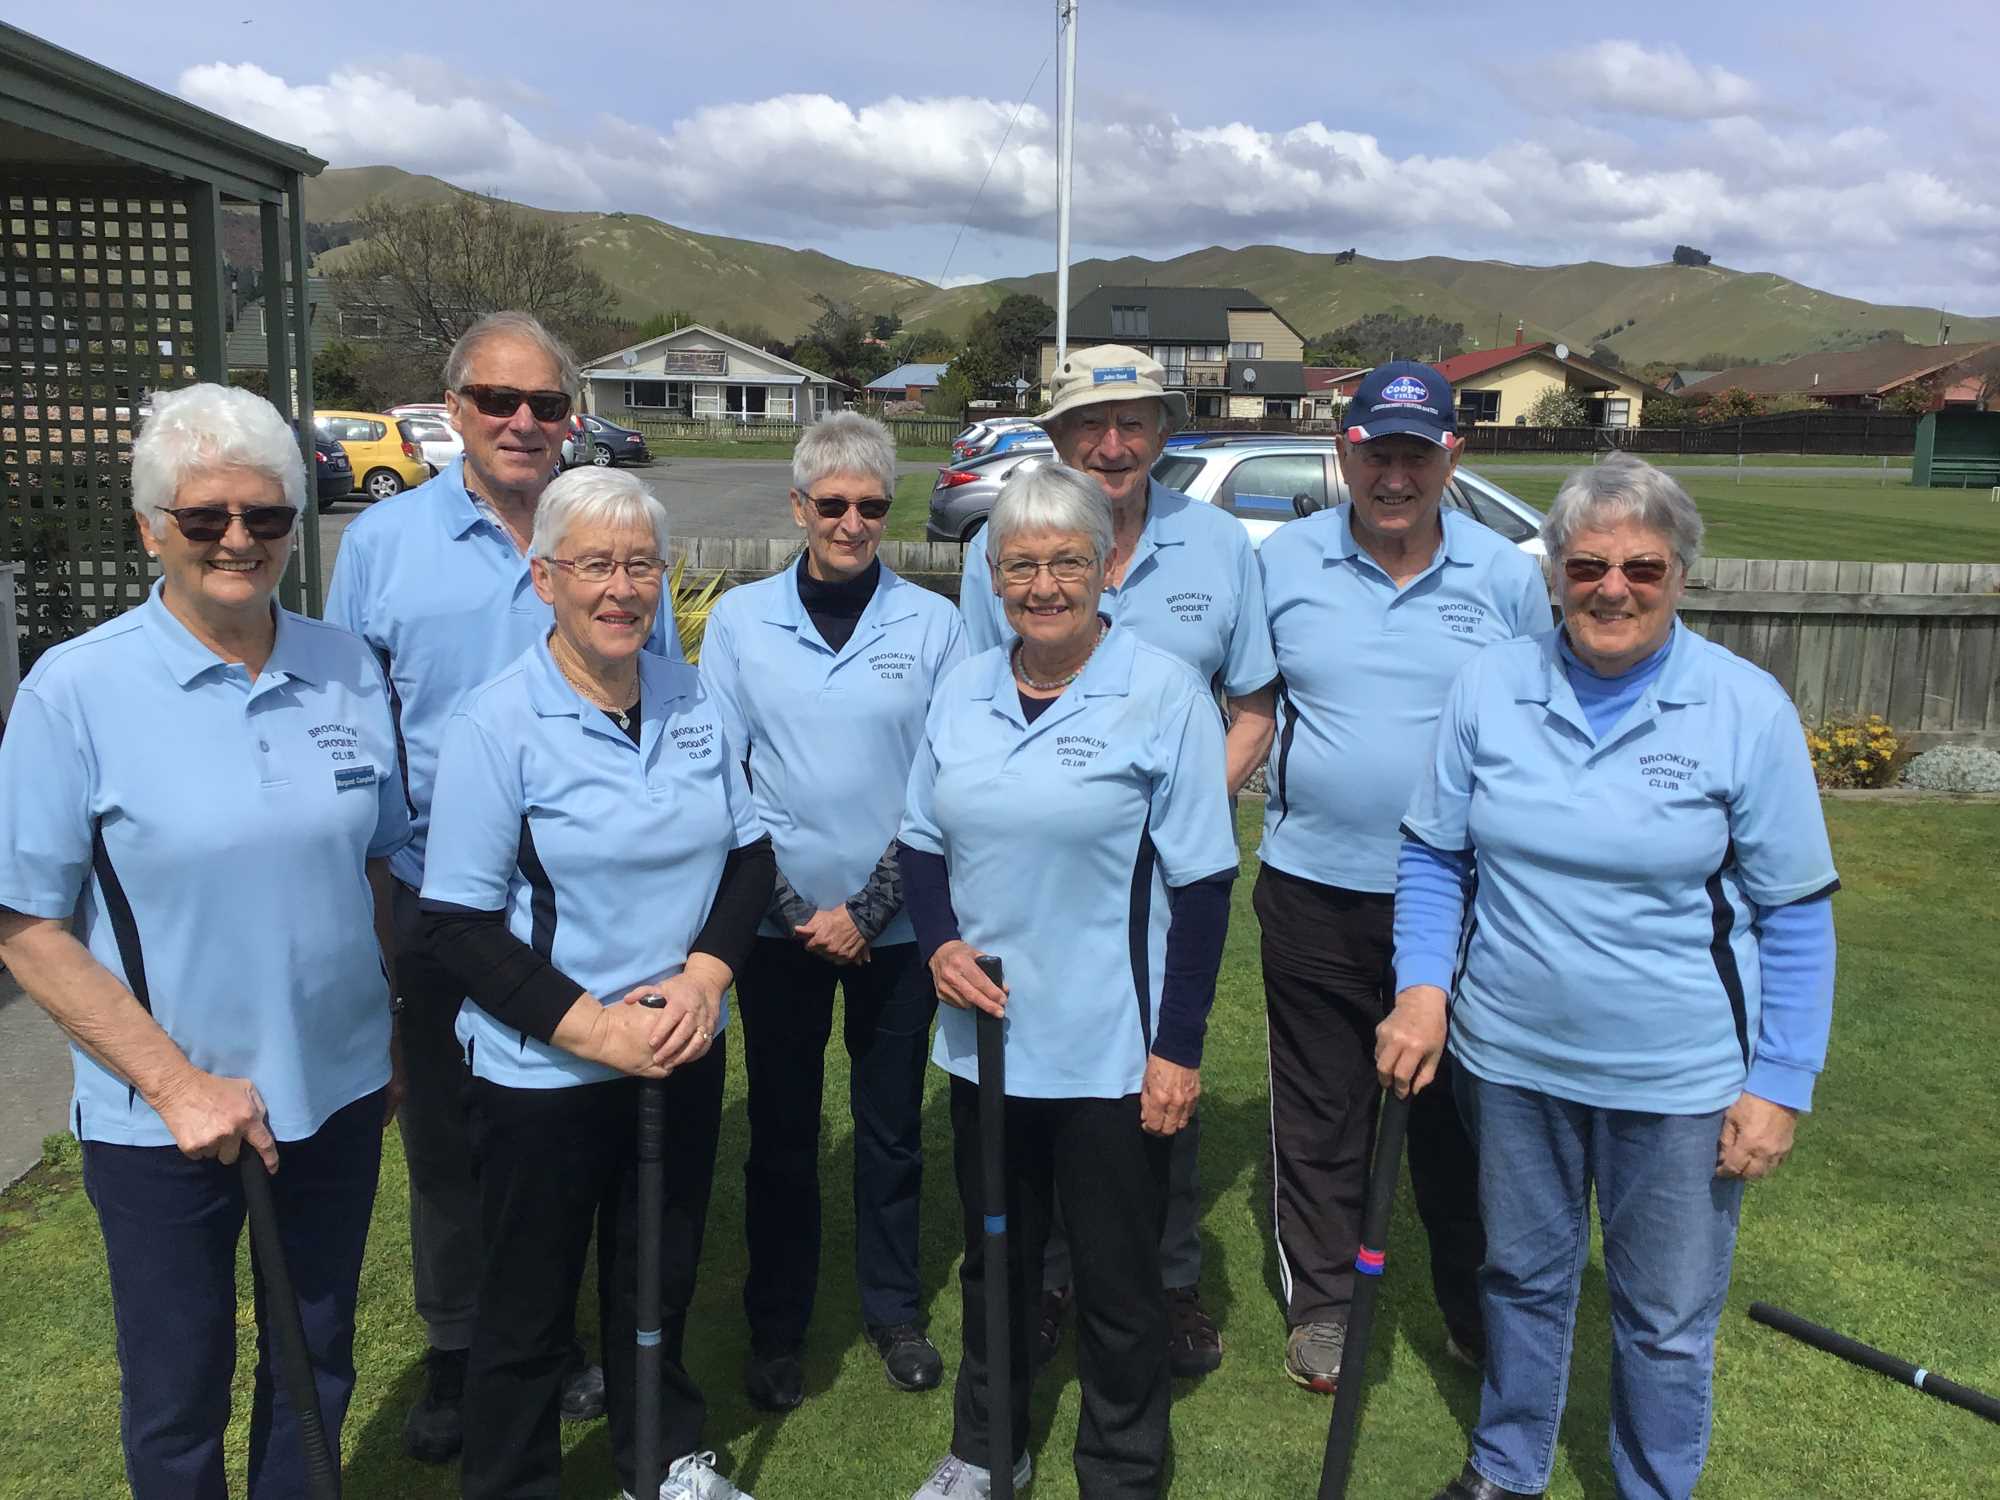 Winners of medals at the Timaru Masters 2019